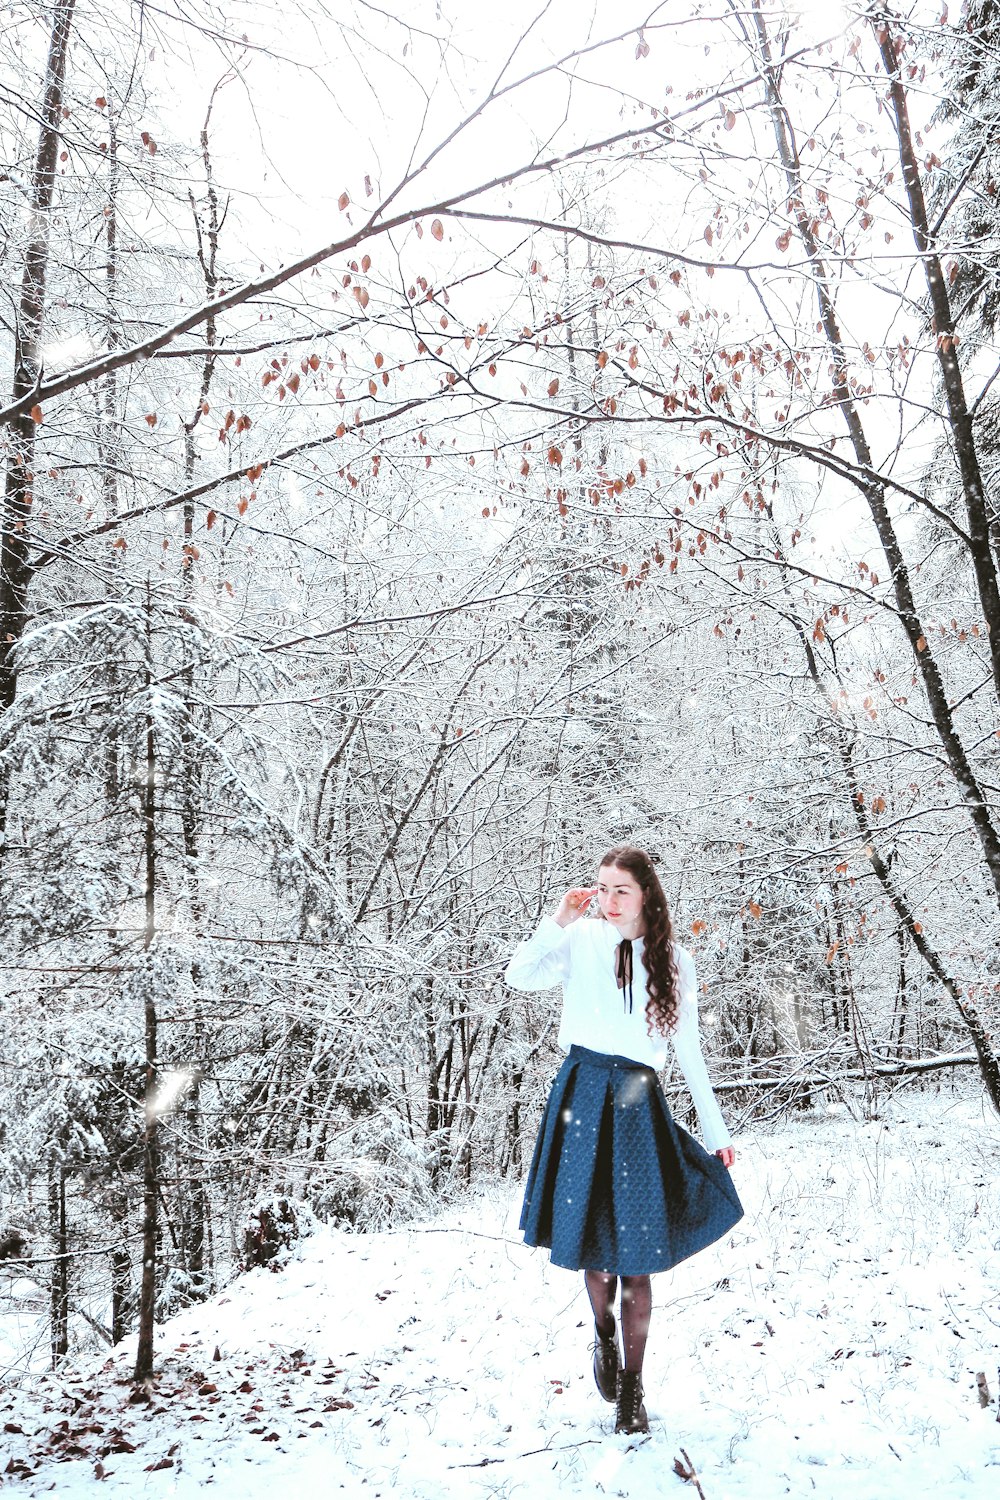 woman in white long sleeve shirt and blue skirt standing on snow covered ground surrounded by